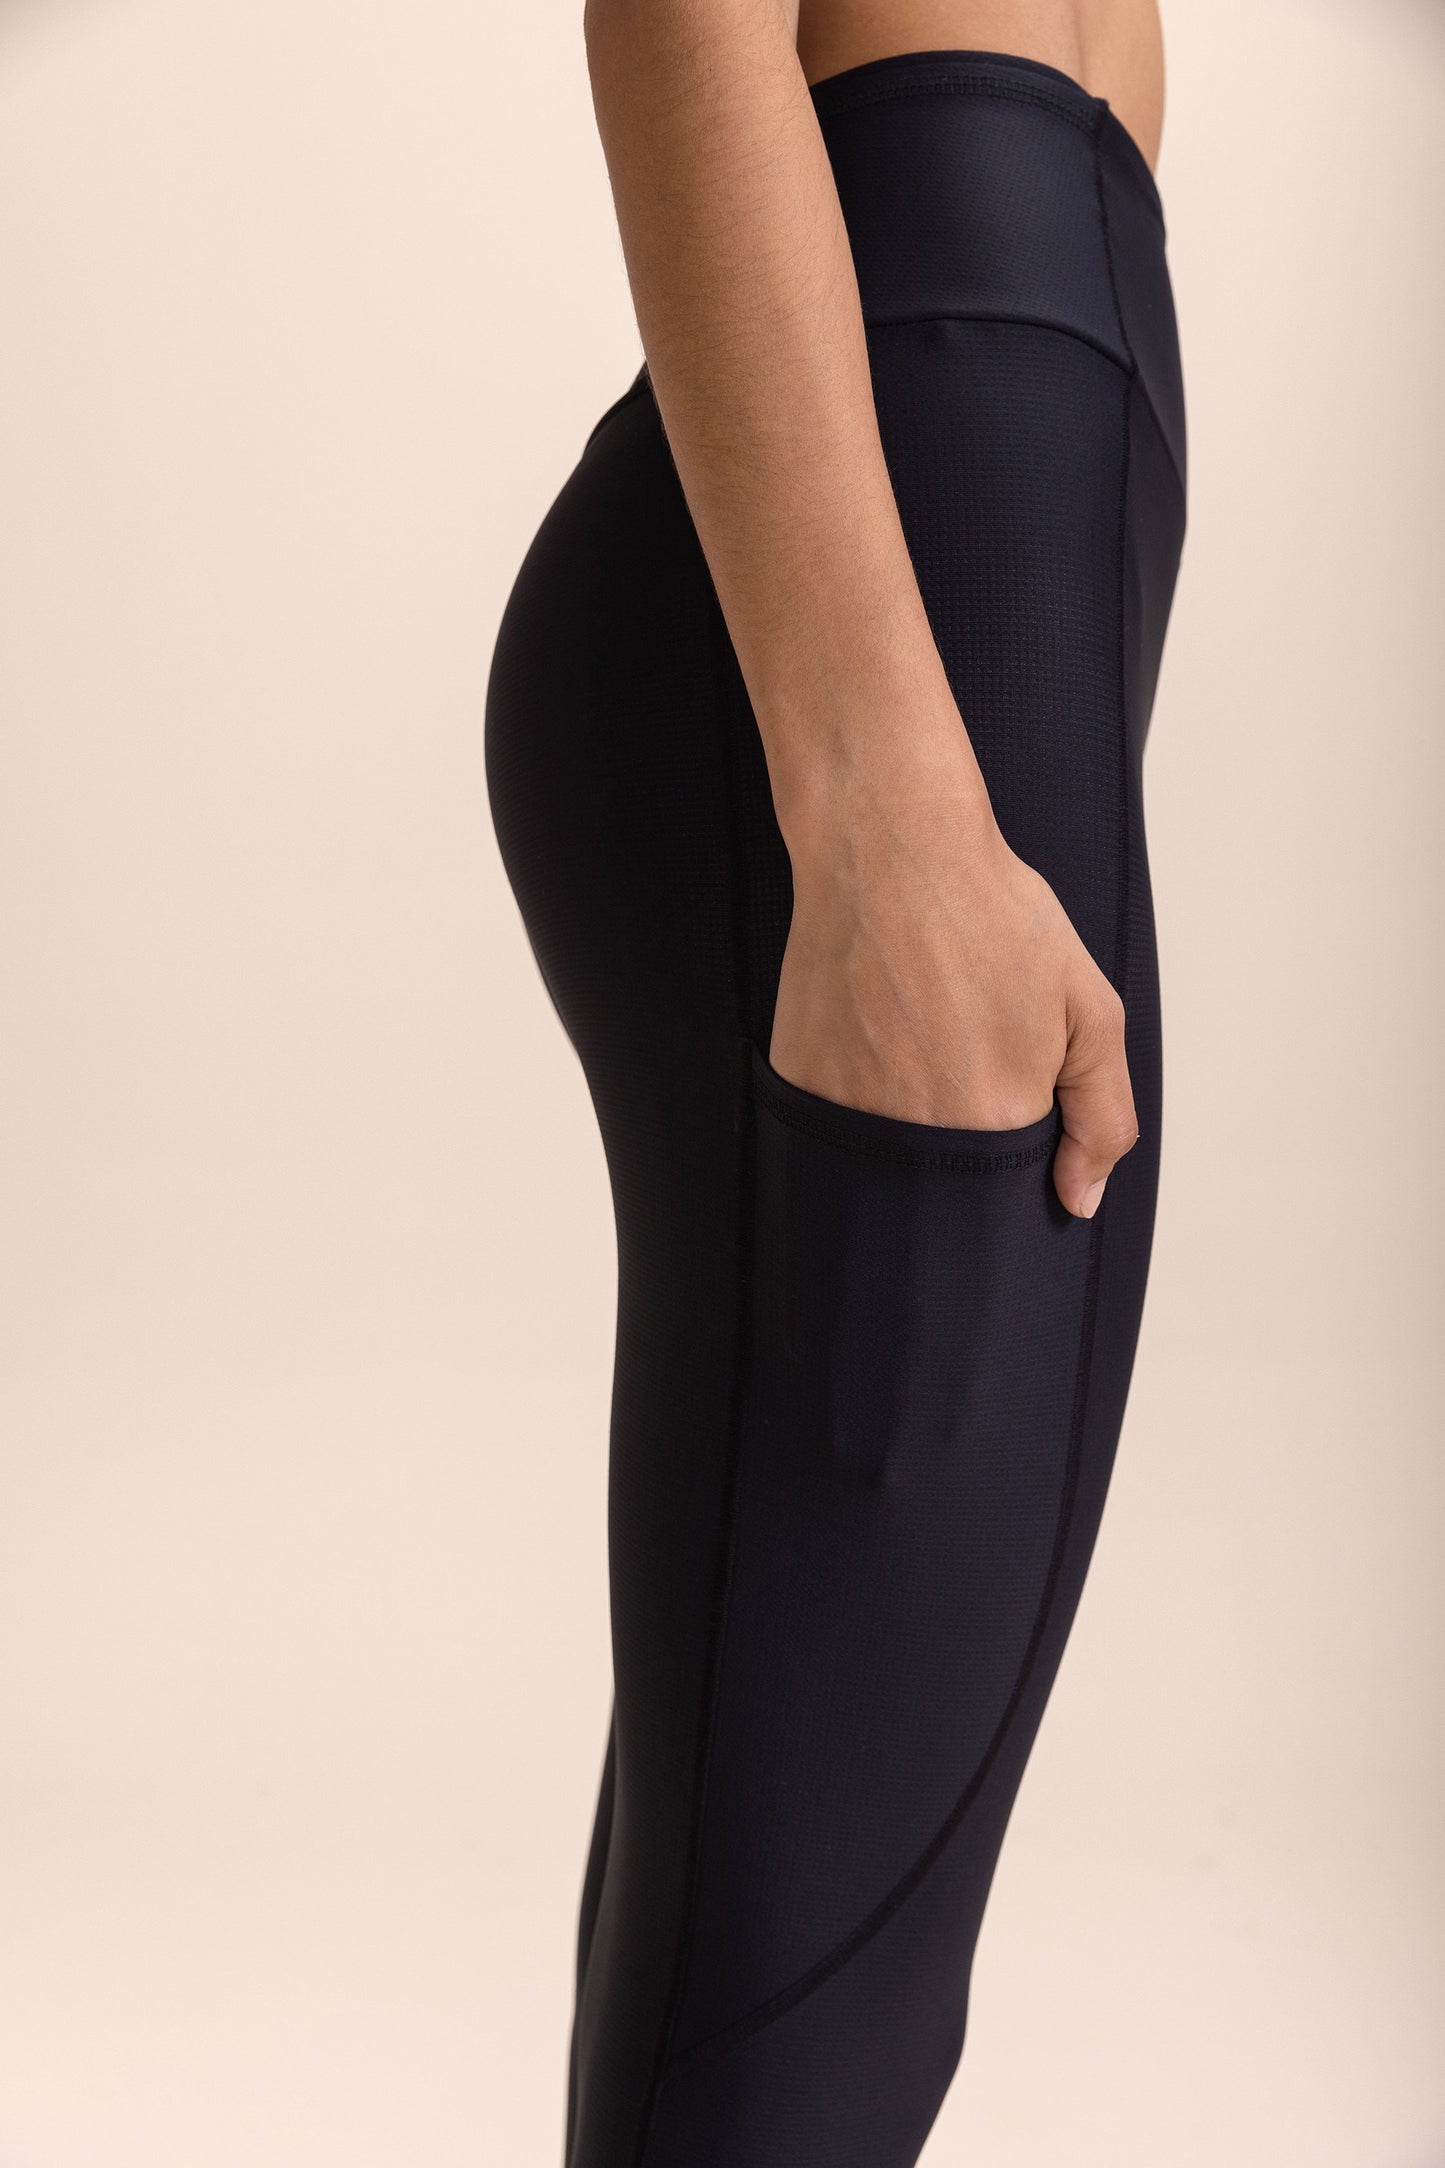 Close-up of a person wearing black leggings with a hand in one of the six pockets, highlighting the ergonomic design and high compression fabric.